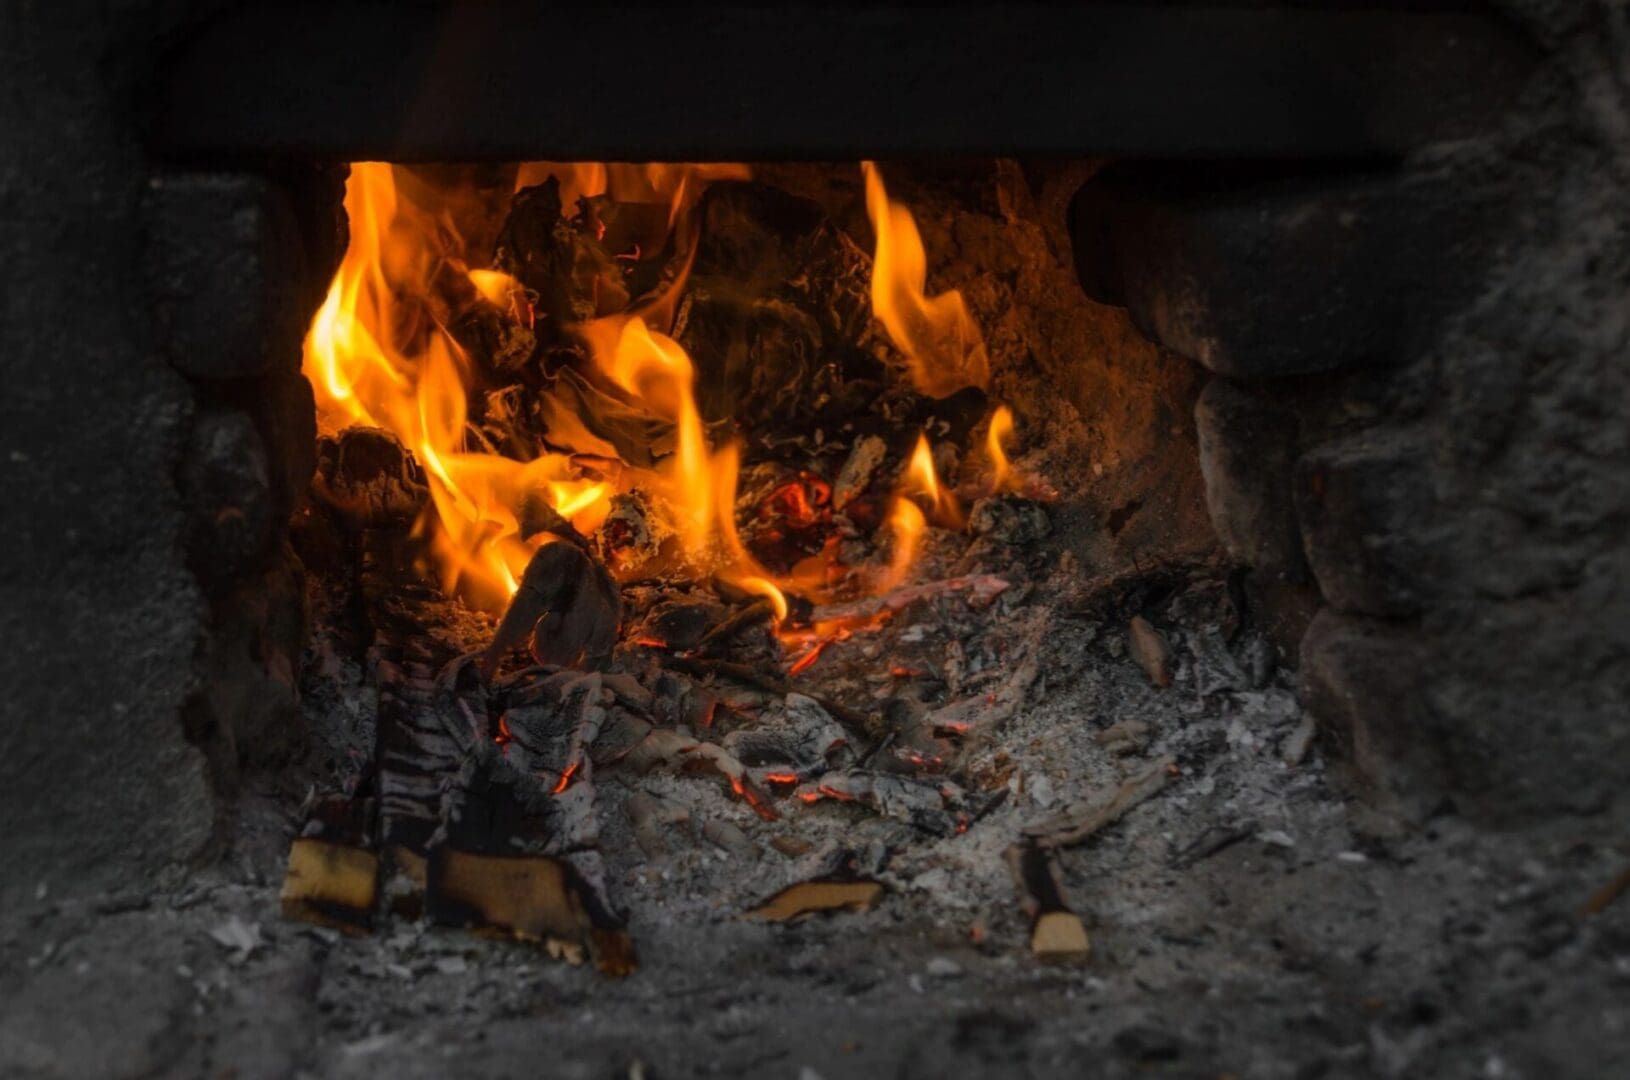 An image of a fire in an oven.